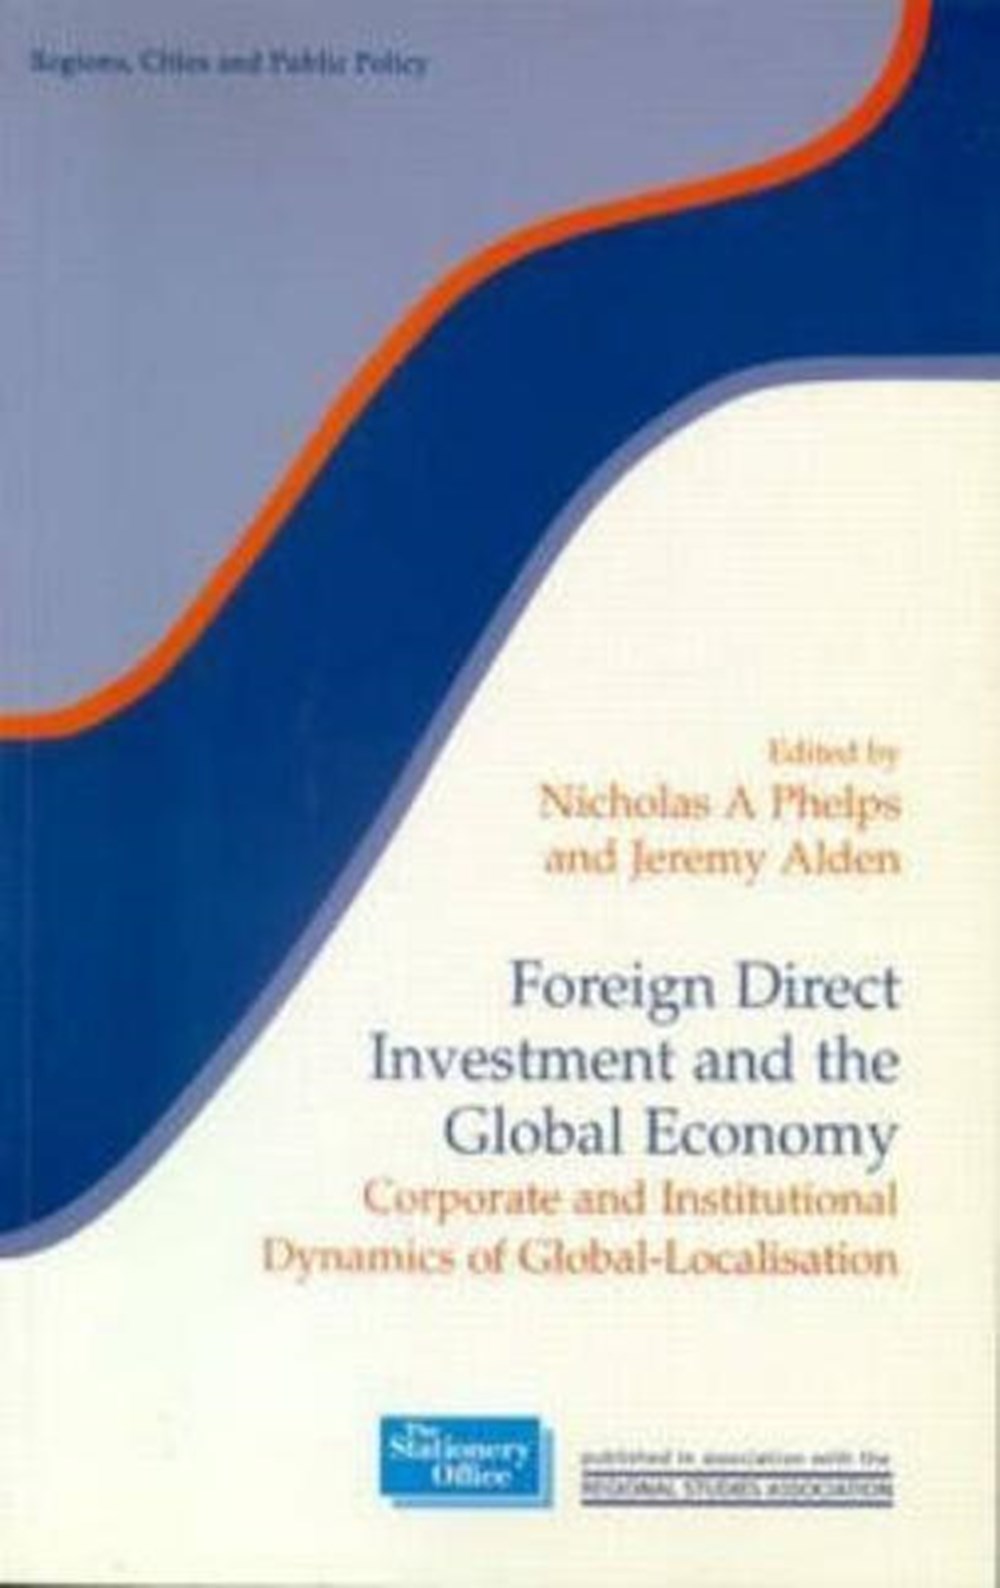 Foreign Direct Investment and the Global Economy: Corporate and Institutional Dynamics of Global-Loc